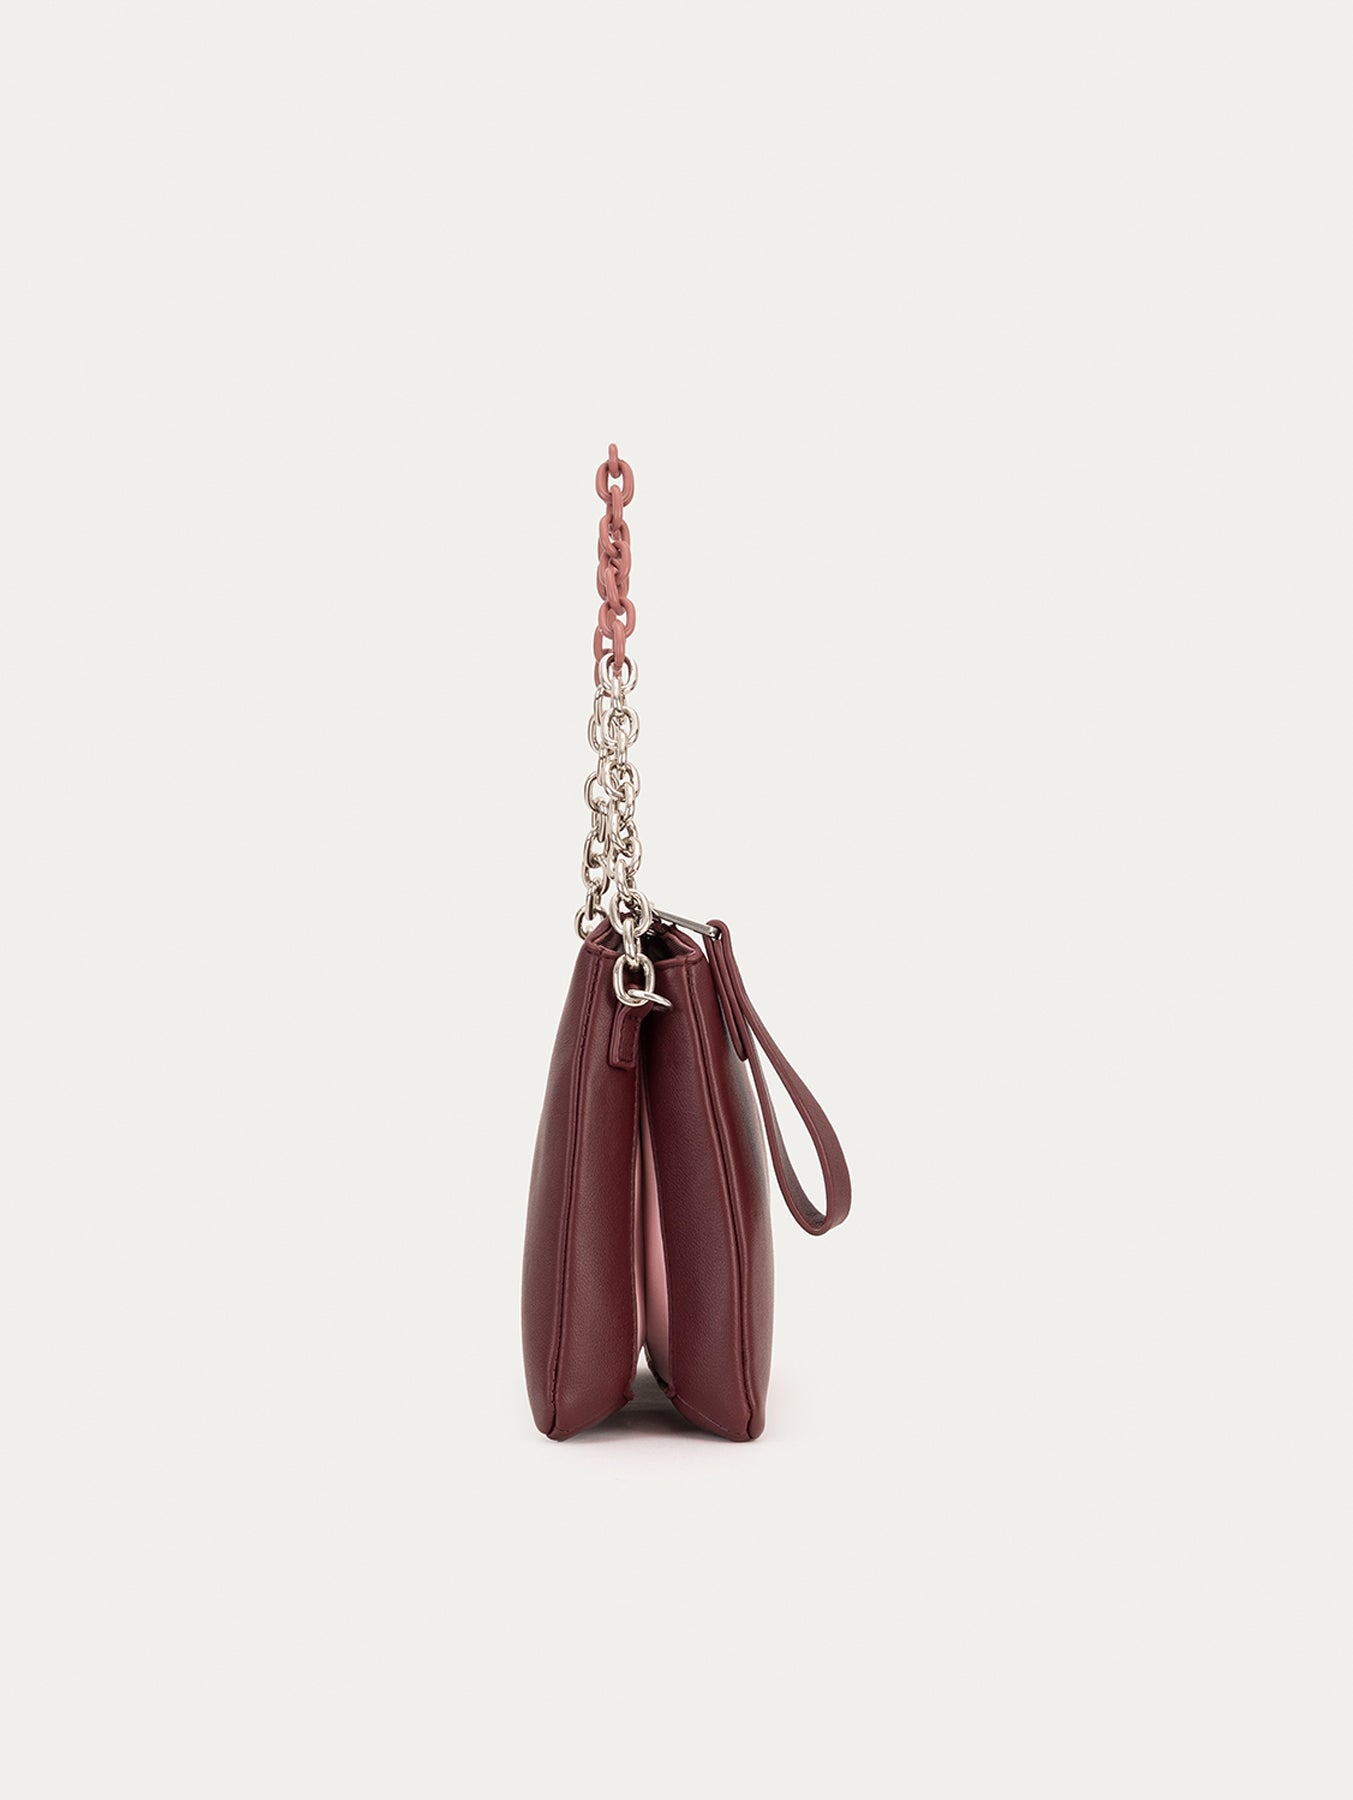 LEATHER BURGUNDY PIGALLE DOUBLE CHAIN HANDLE SHOULDER BAG 